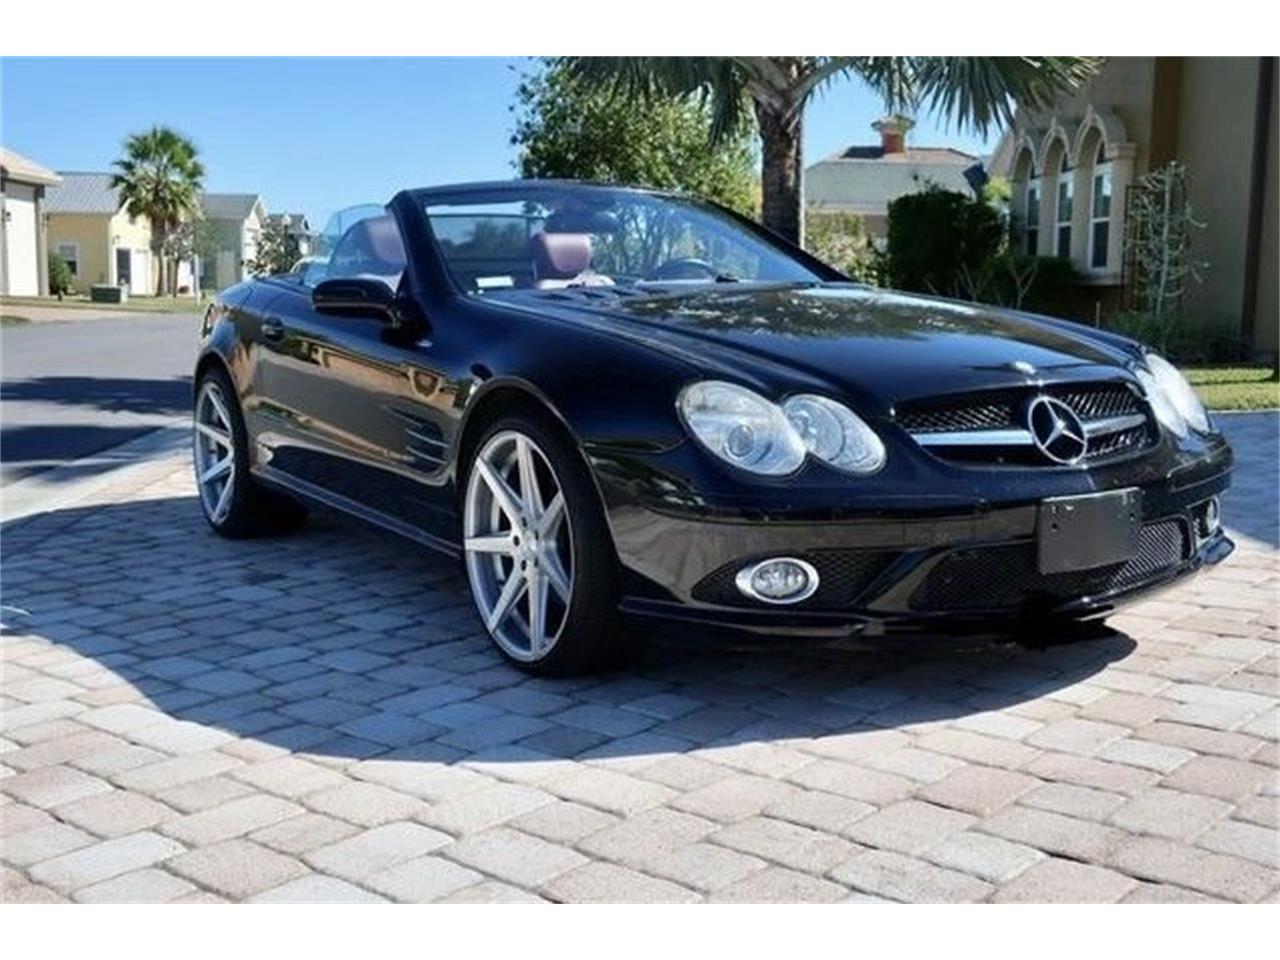 For Sale at Auction: 2007 Mercedes-Benz SL550 in Punta Gorda, Florida for sale in Punta Gorda, FL